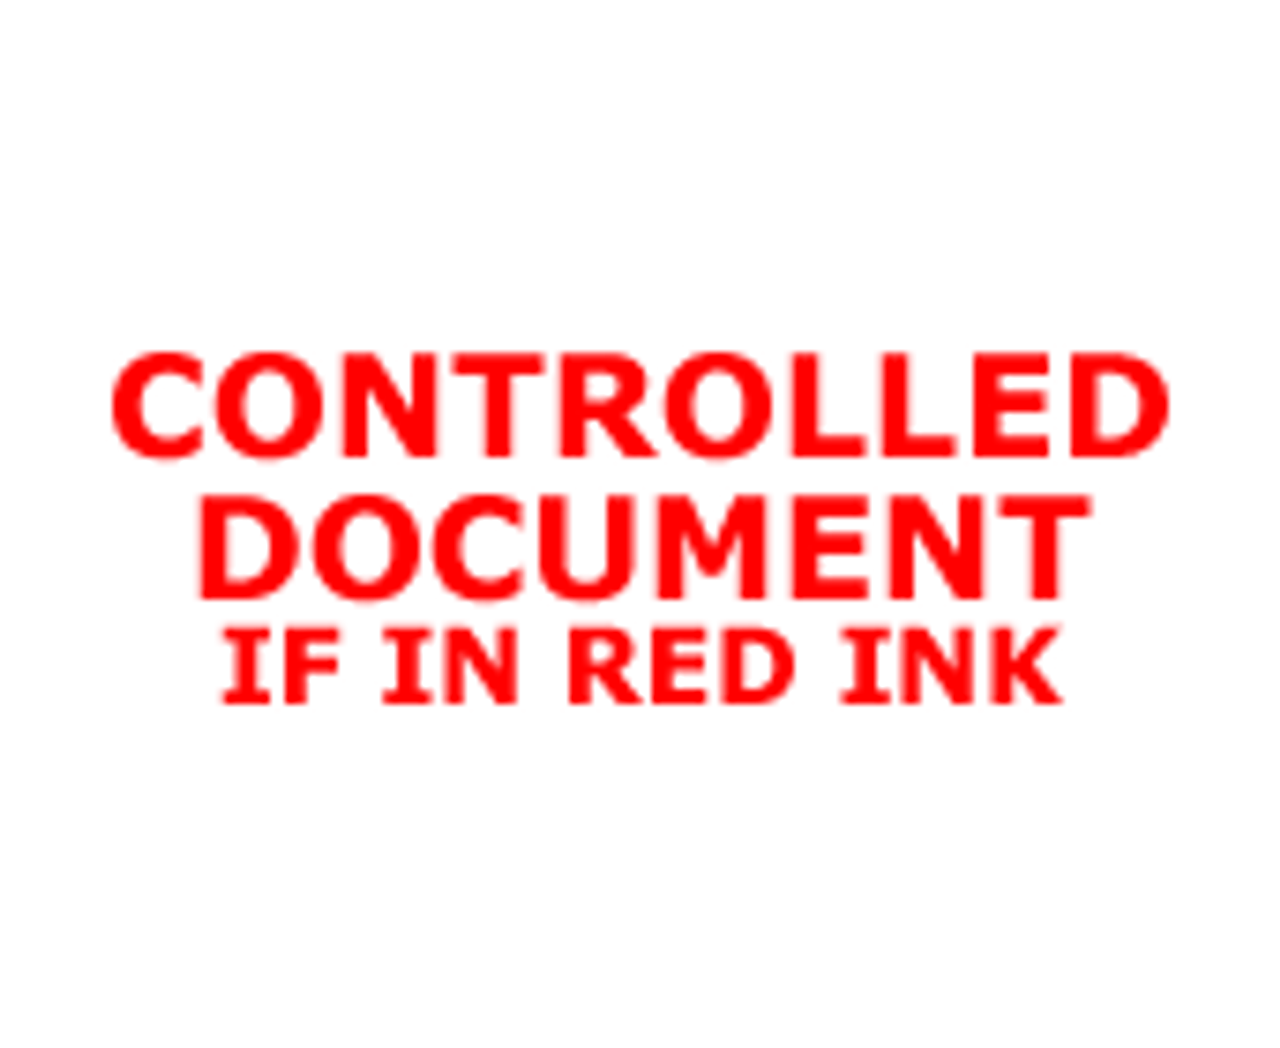 CONTROLLED DOCUMENT IF IN RED INK Rubber Stamp for office use self-inking